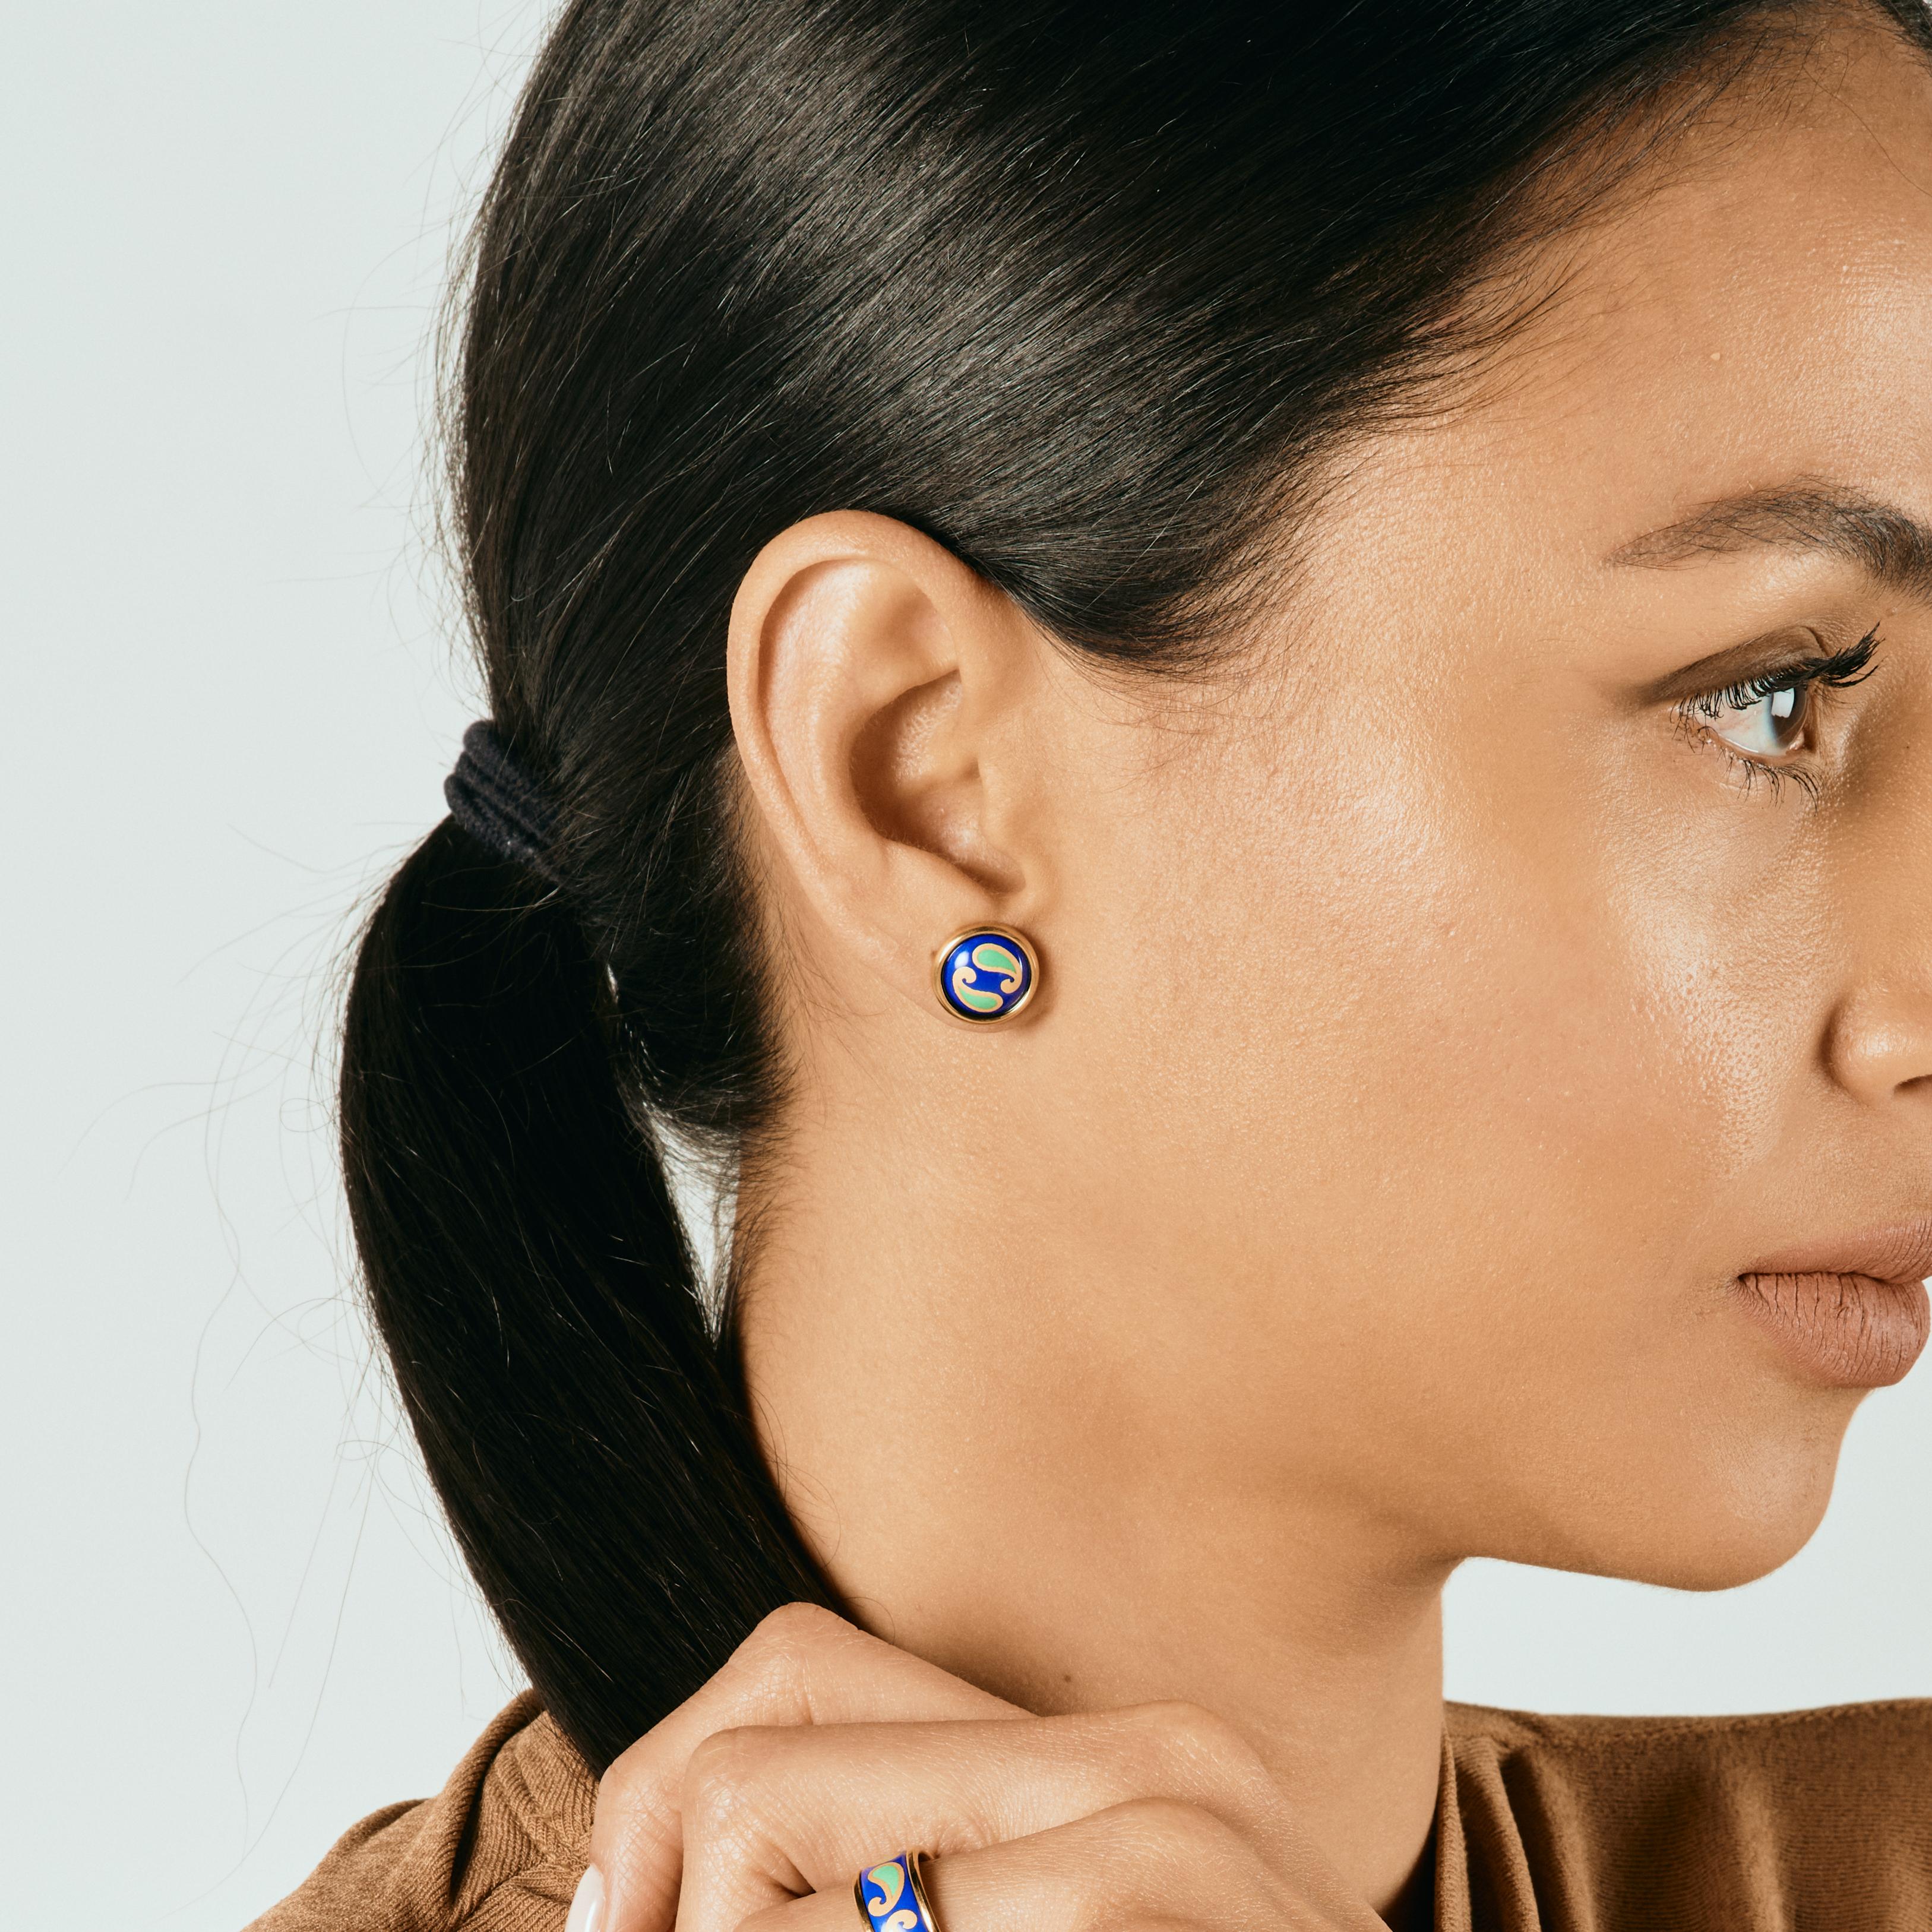 Introducing the Eternity Earrings. 18k gold-plated stainless steel that will not oxidize or discolour, so you can wear your jewelry every day, everywhere. Hand-painted genuine fire enamel will never fade away. Its vivid and radiant colours will last